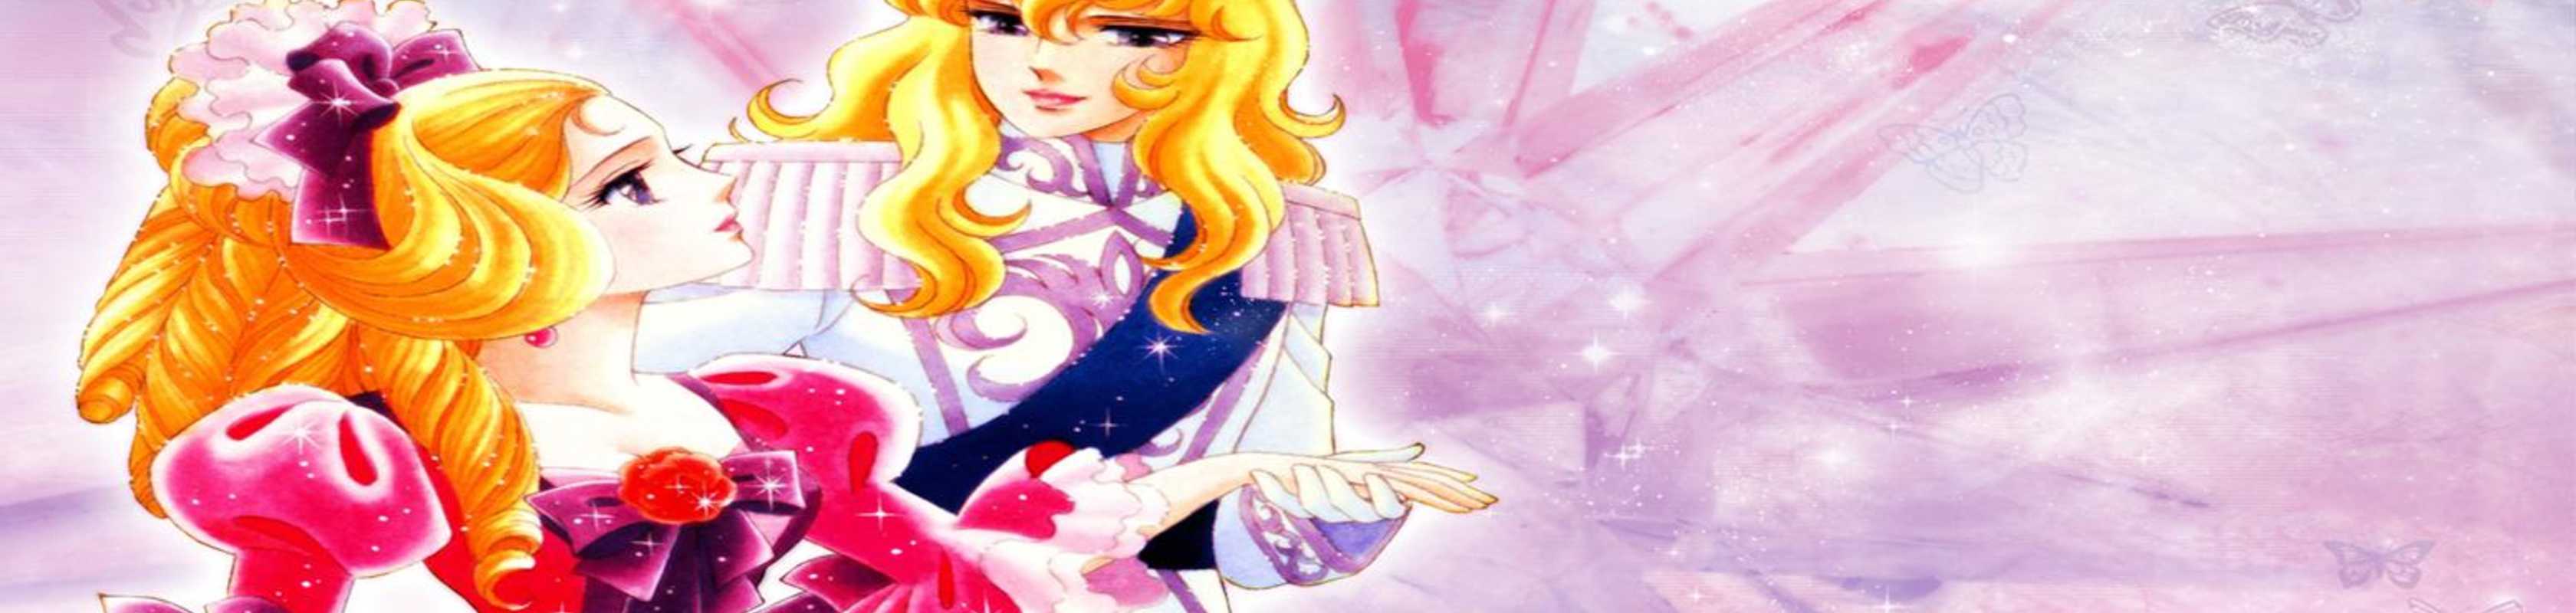 The Rose of Versailles cover